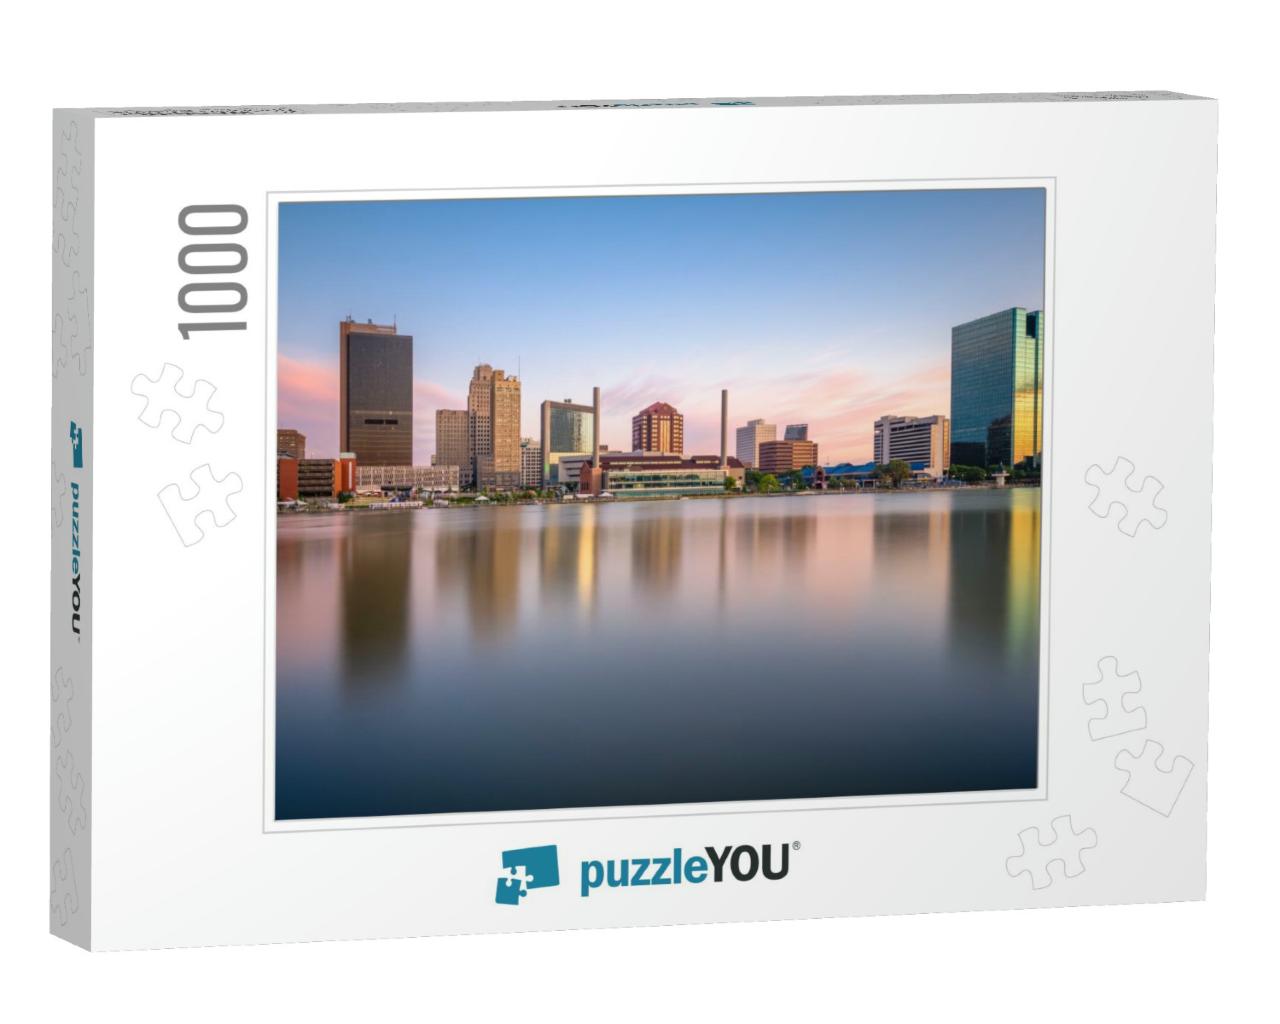 Toledo, Ohio, USA Downtown Skyline on the Maumee River At... Jigsaw Puzzle with 1000 pieces